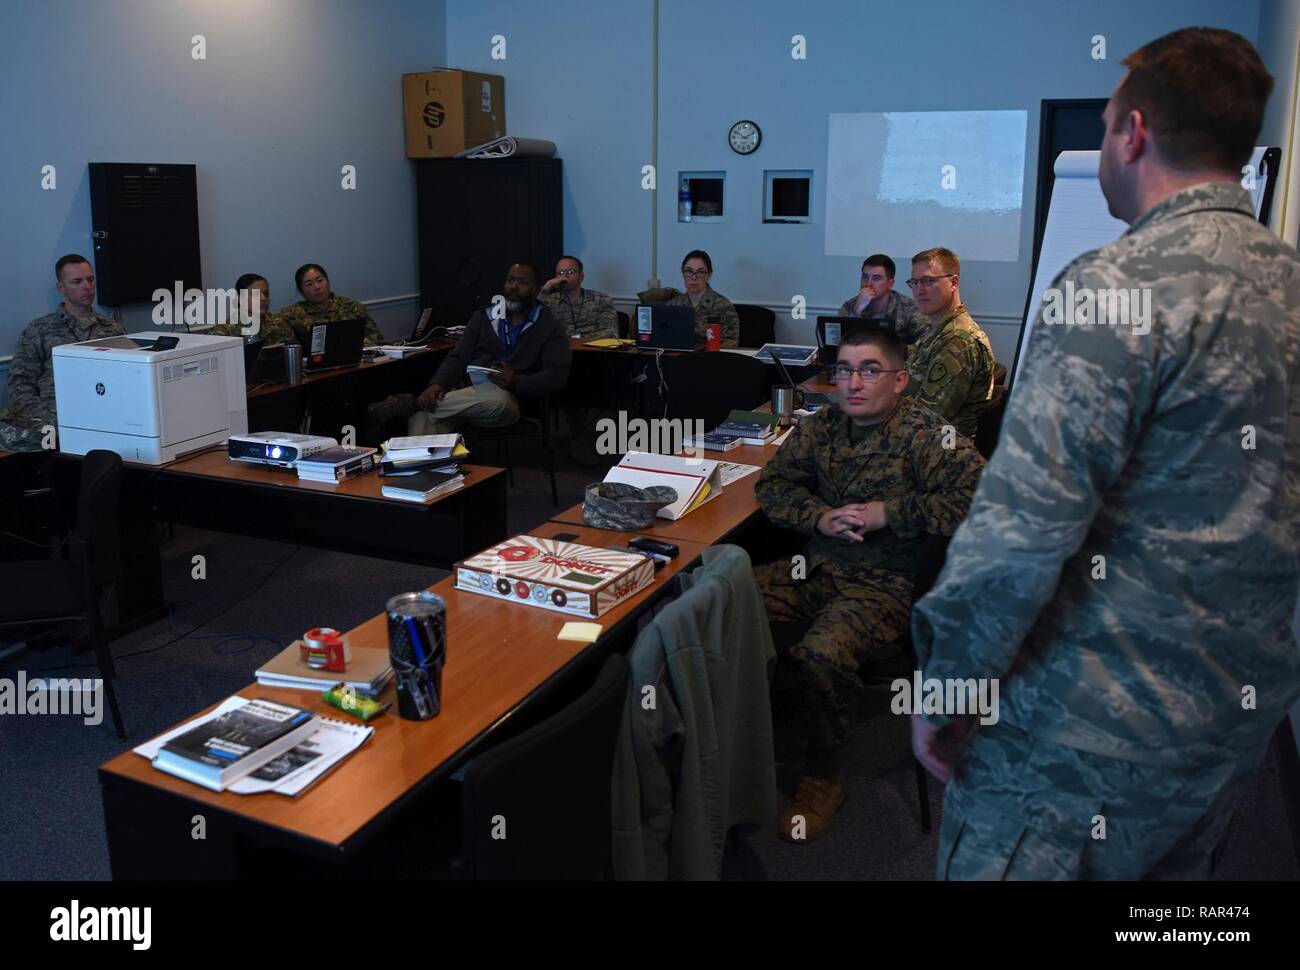 U.S. military and civilian members participate in one of the four operational planning teams (OPT) during Mission Readiness Exercise (MRX) 19-2, Dec. 11, 2018, Shaw Air Force Base, S.C. The role of the OPT is to direct planning efforts, including implementation of plans and orders, as part of the Joint Planning Process during the exercise. MRX 19-2 is an initial operational certification event designed to demonstrate Ninth Air Force’s ability to effectively plan, prepare, execute and assess Combined Joint Task Force operations at the operational level of war as tasked by the Air Force Chief of Stock Photo